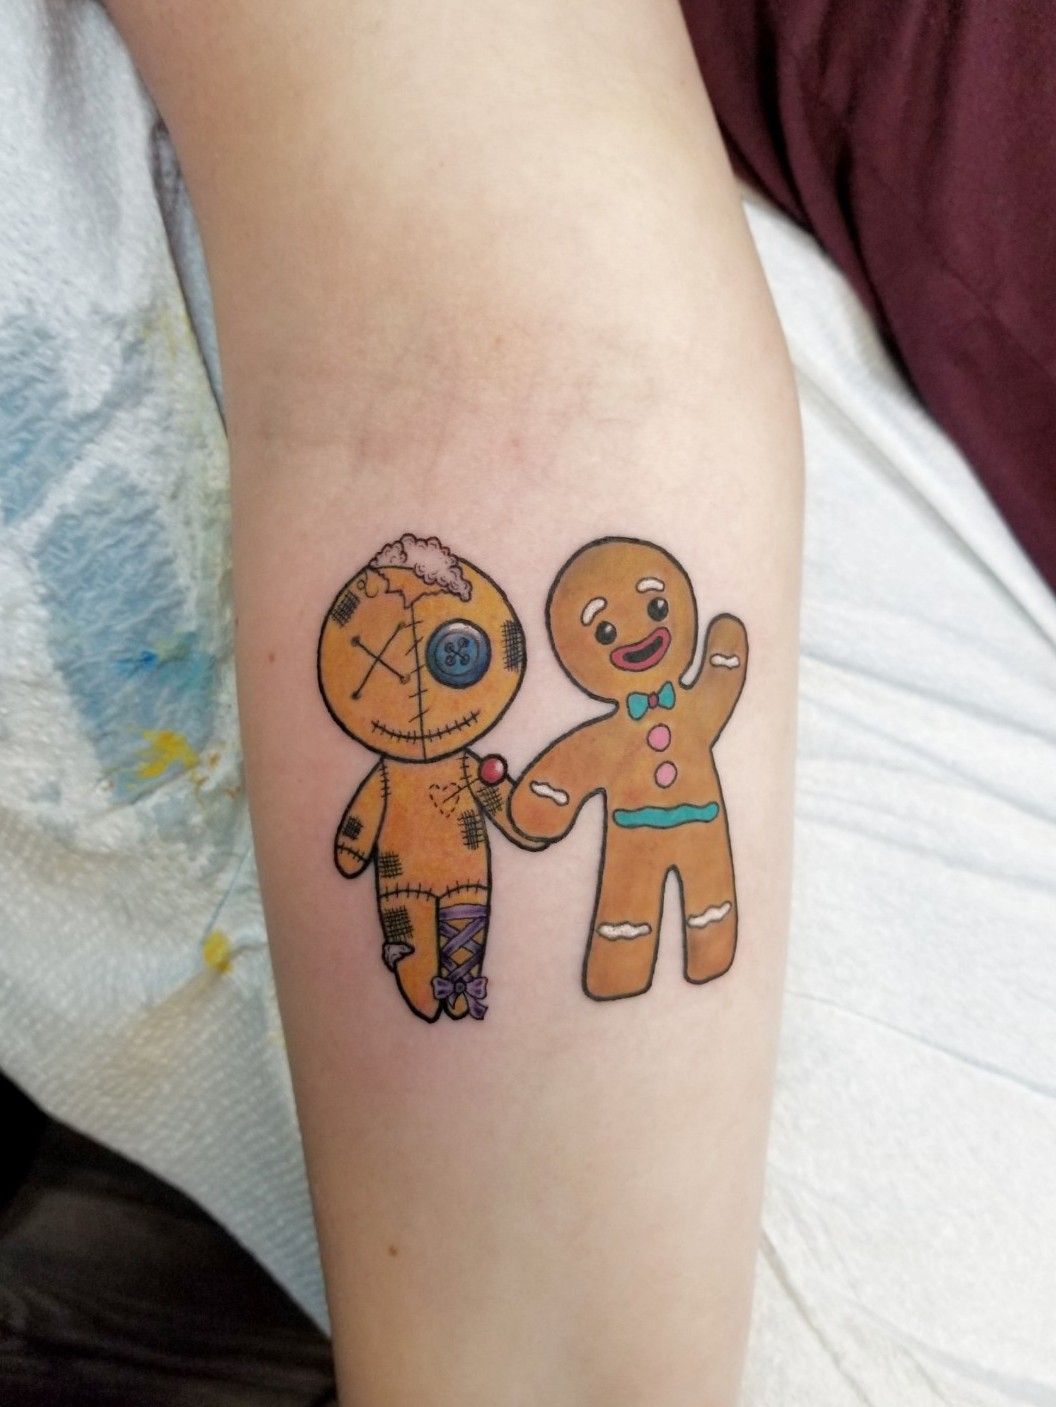 Tattoo uploaded by Steven Michael • Ginger bread man and voodoo doll • Tattoodo